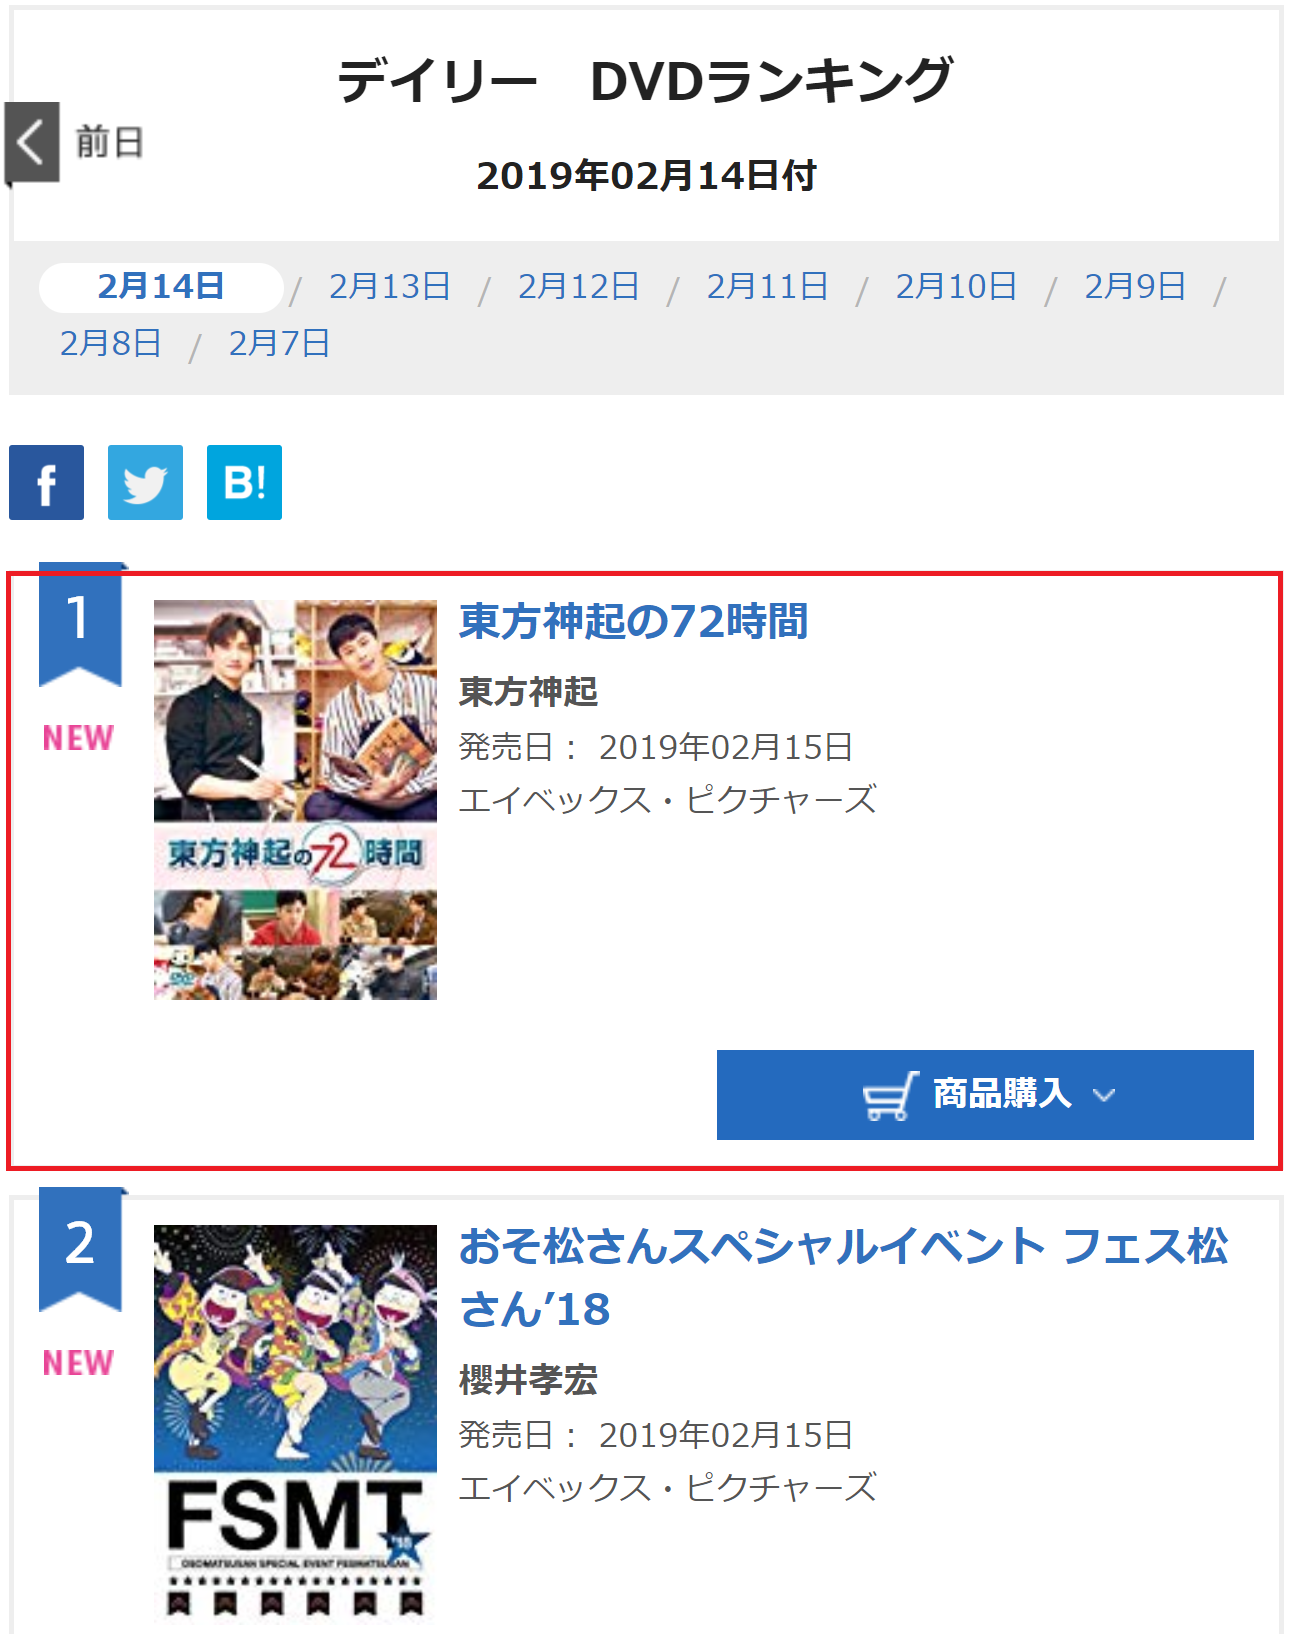 Oricon Daily Chart